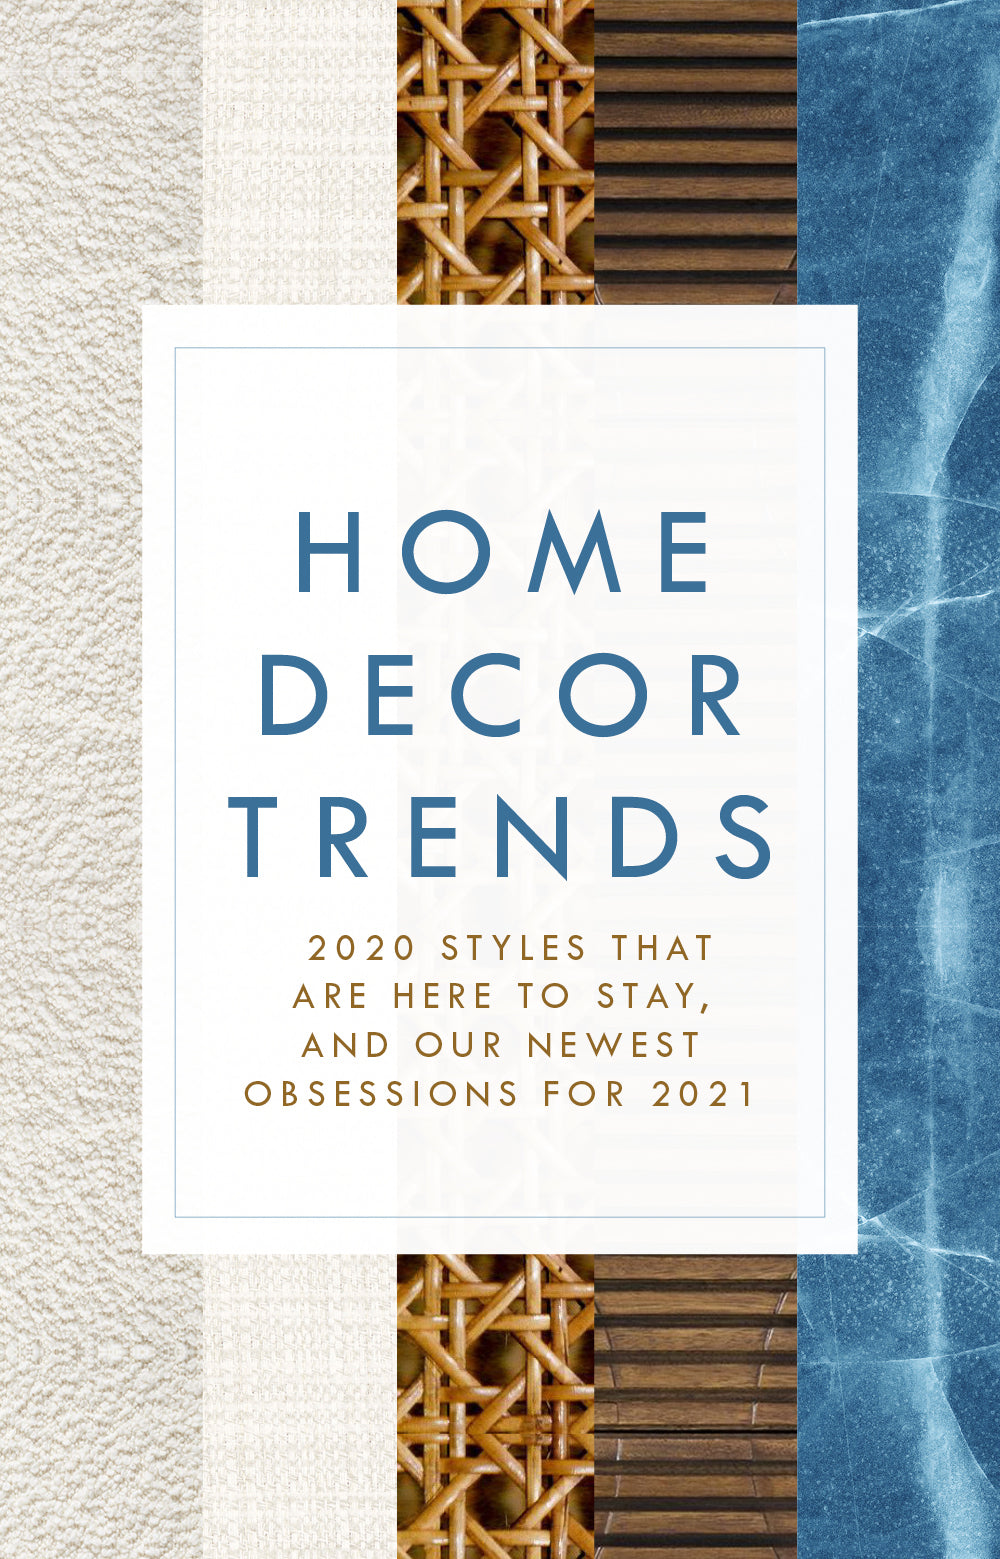 Home Decor Trends to Love in 2021